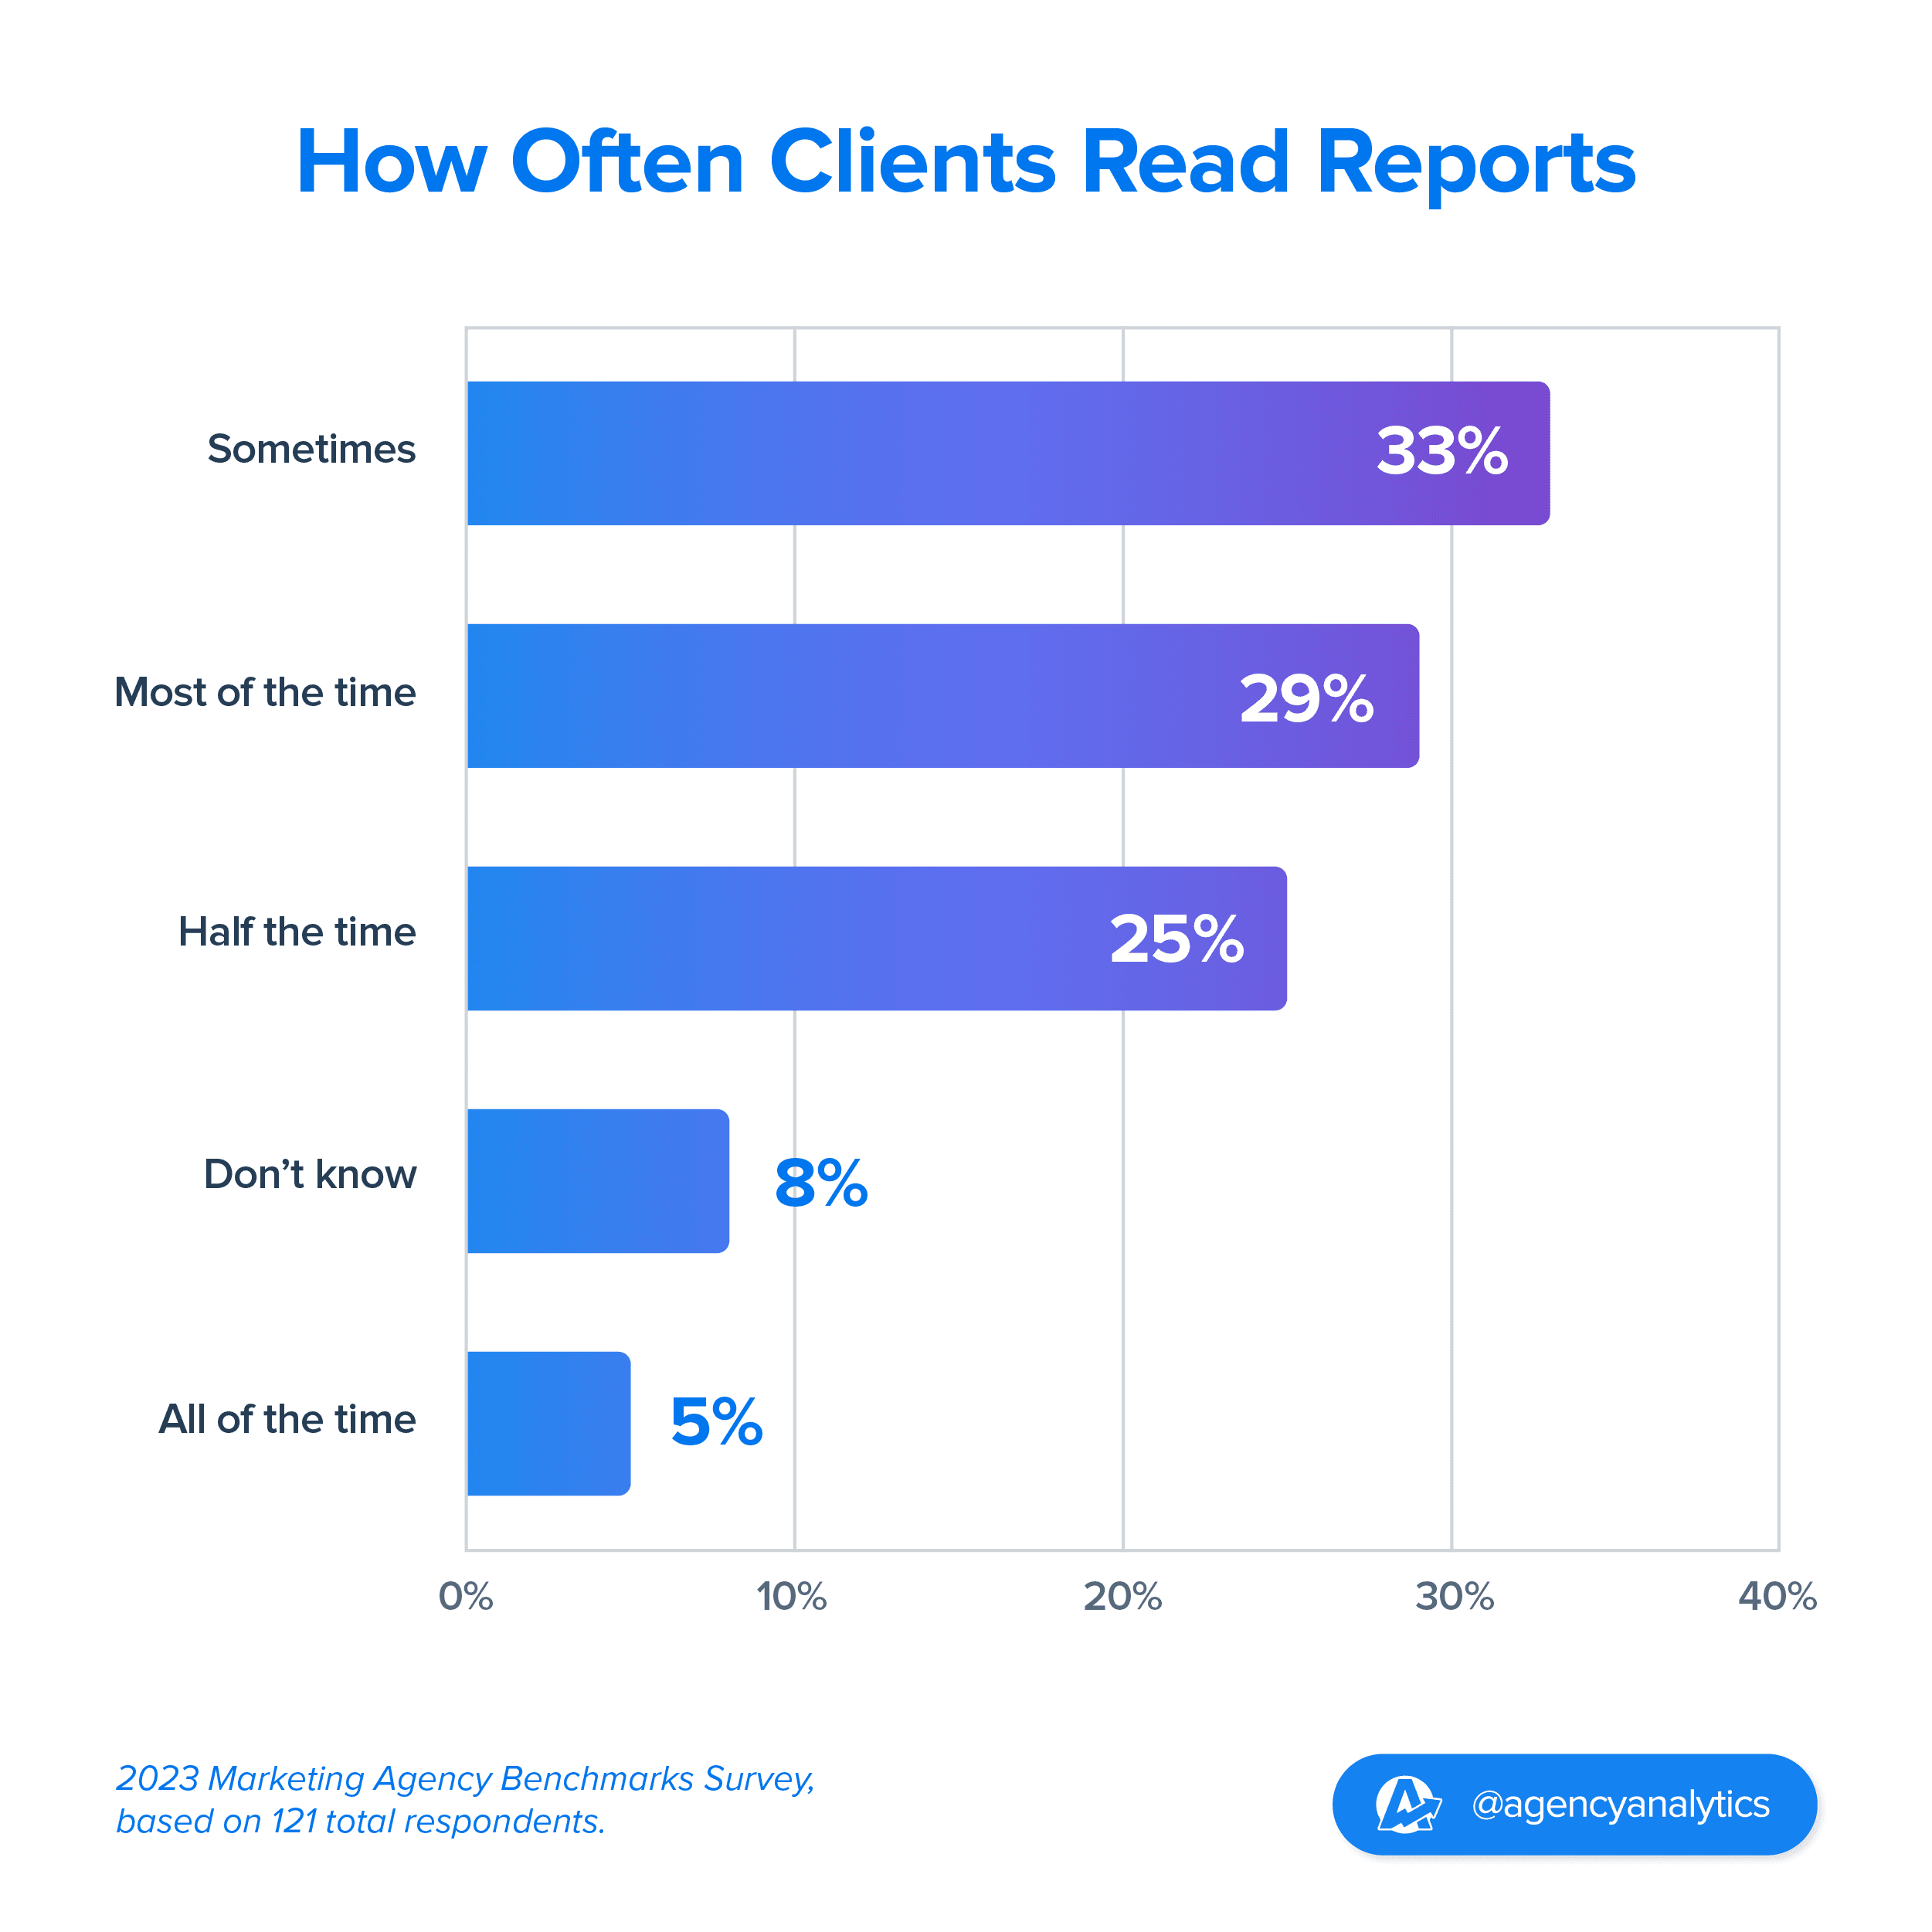 pie chart on how often clients read reports their agency sends 